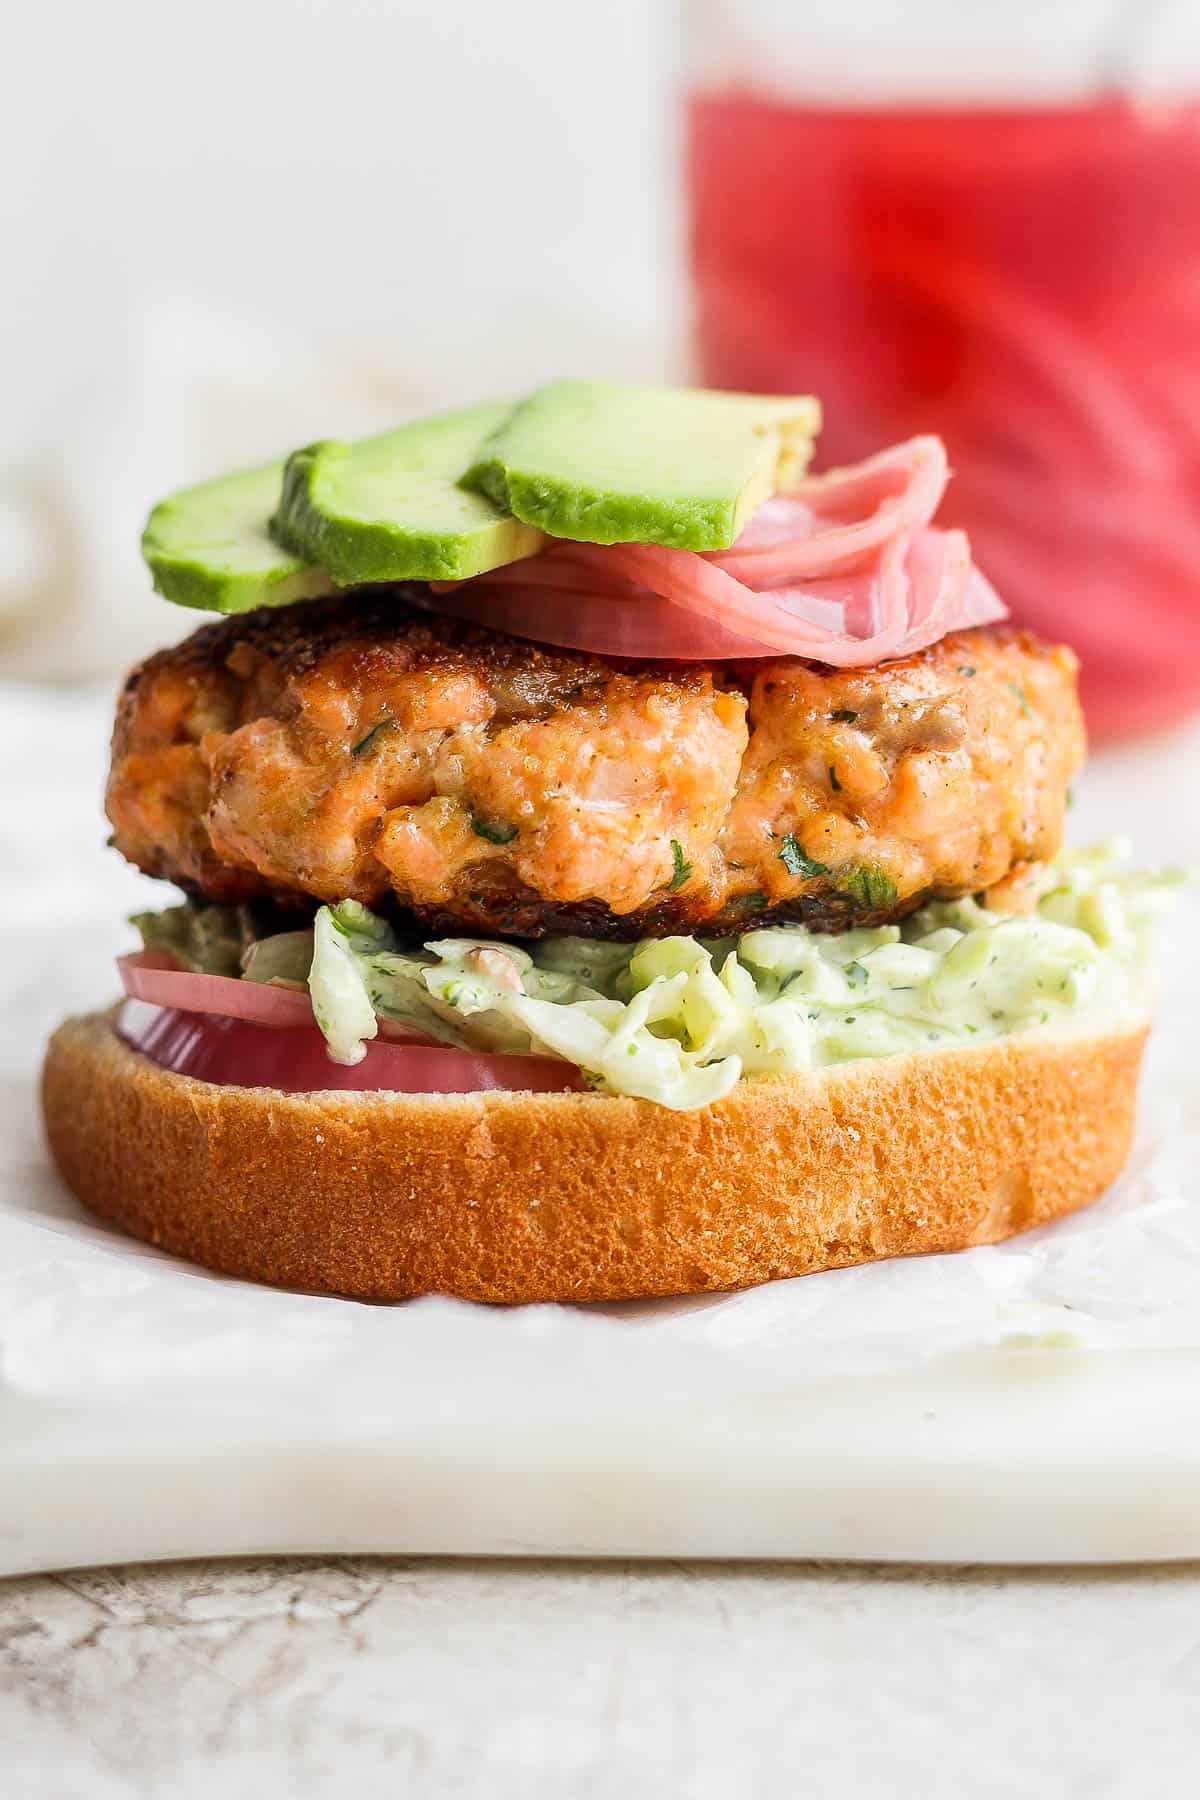 A salmon burger on a bottom bun with all the toppings.